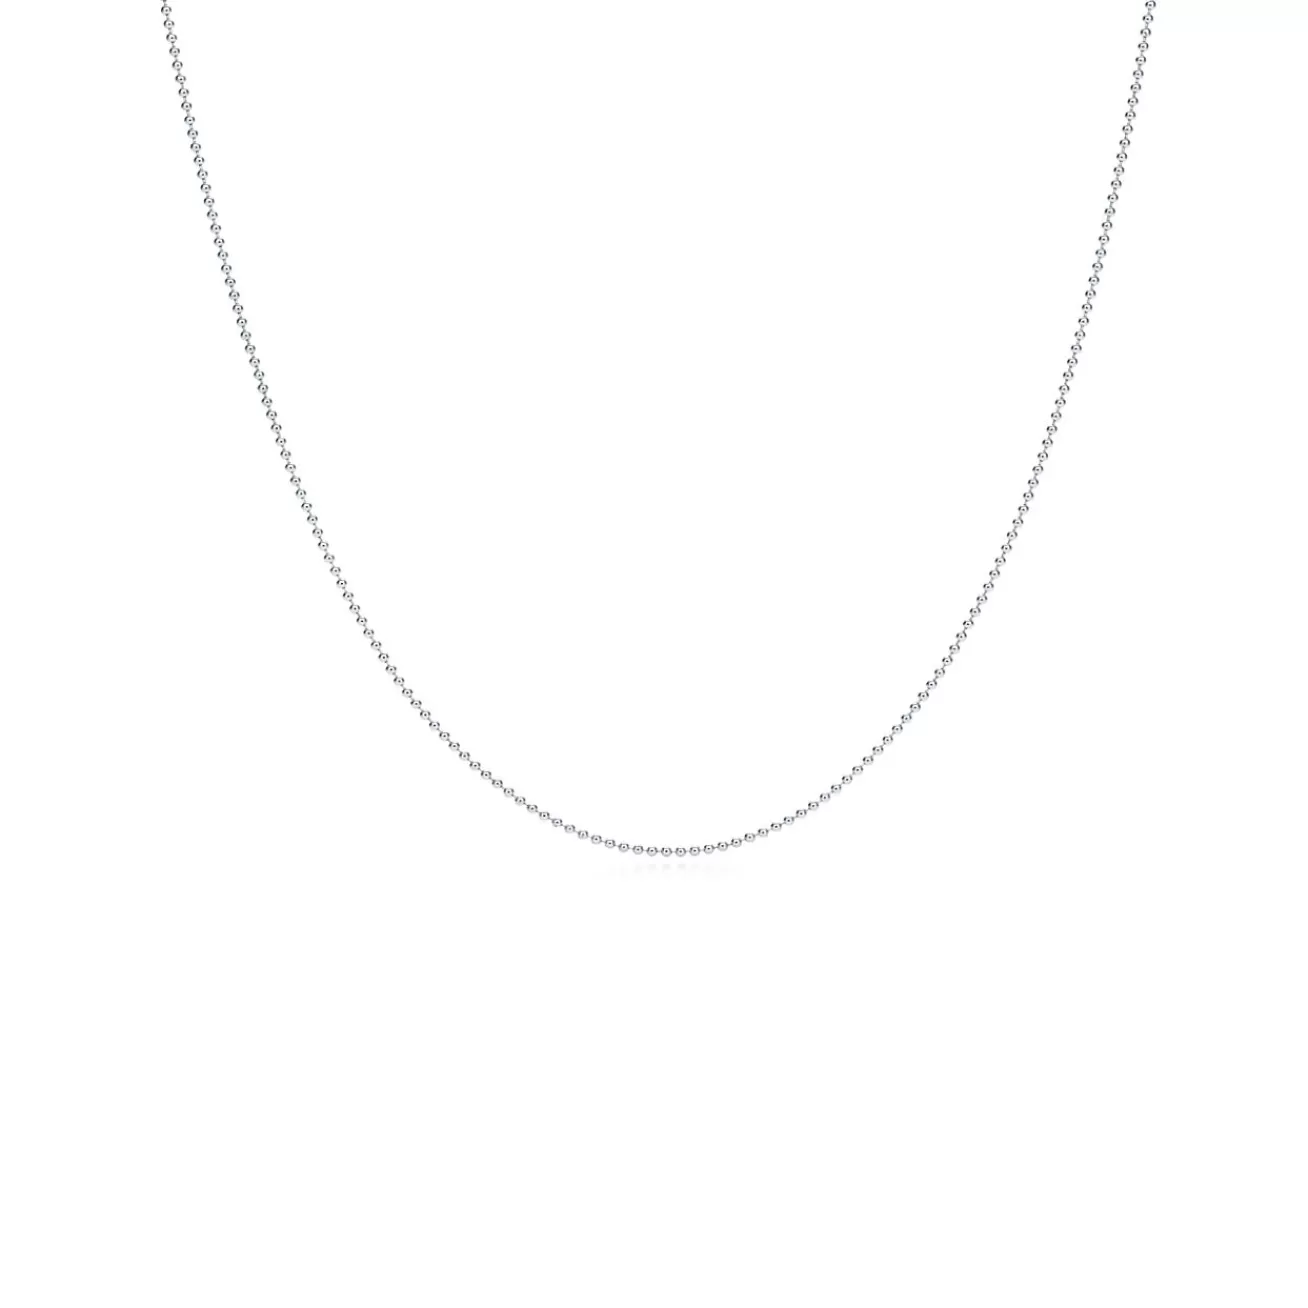 Tiffany & Co. Beaded chain in 18k white gold, 16" long. | ^ Necklaces & Pendants